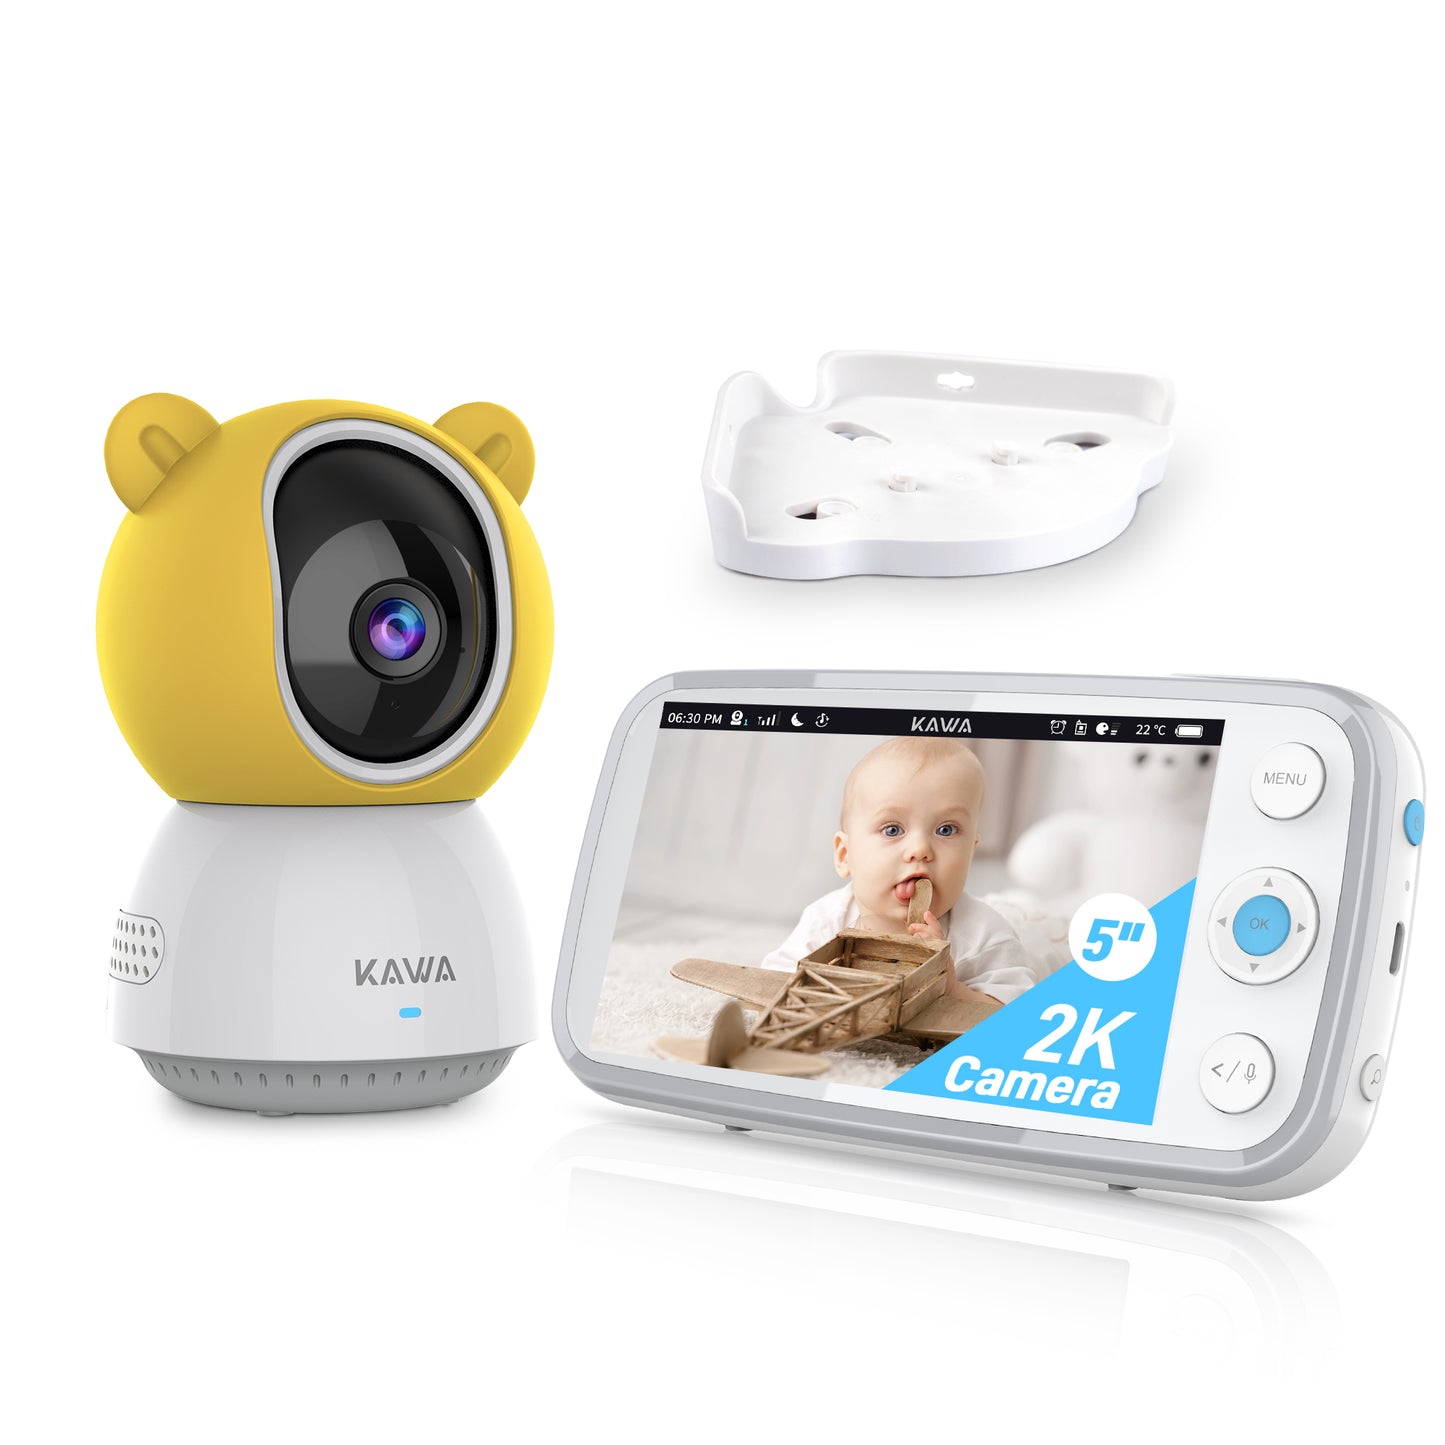 KAWA S7 | Baby Monitor with Camera and Audio - 2K QHD 5" HD Display Video Baby Monitor with Night Vision, Temperature Sensor, 2-Way Audio, Pan Tilt Zoom, White Noise, Lullaby, 20 Hours Battery Life, 1000ft Range (Yellow Bear Cover)